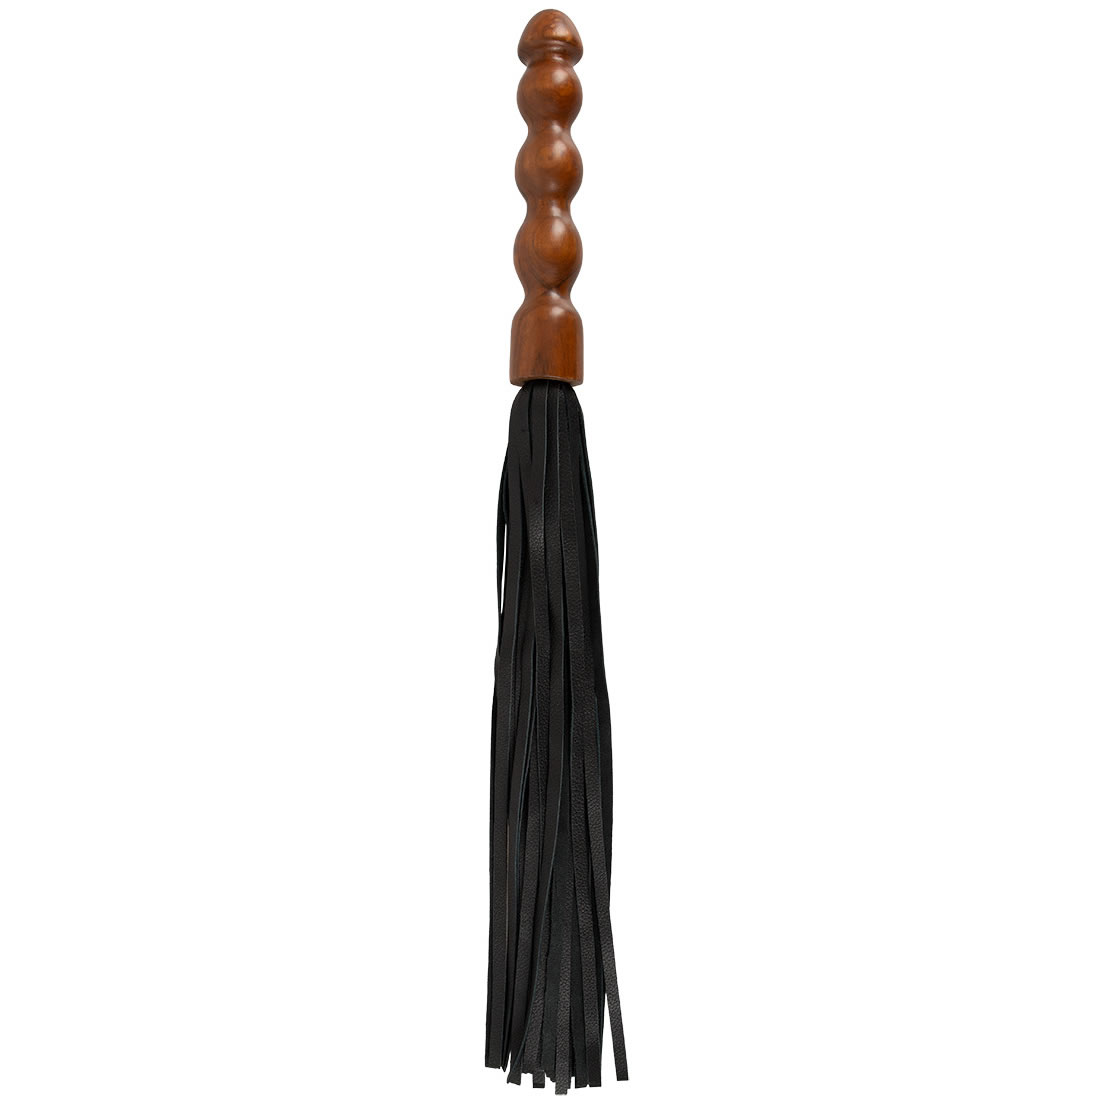 Leather Flogger with Wood Grip